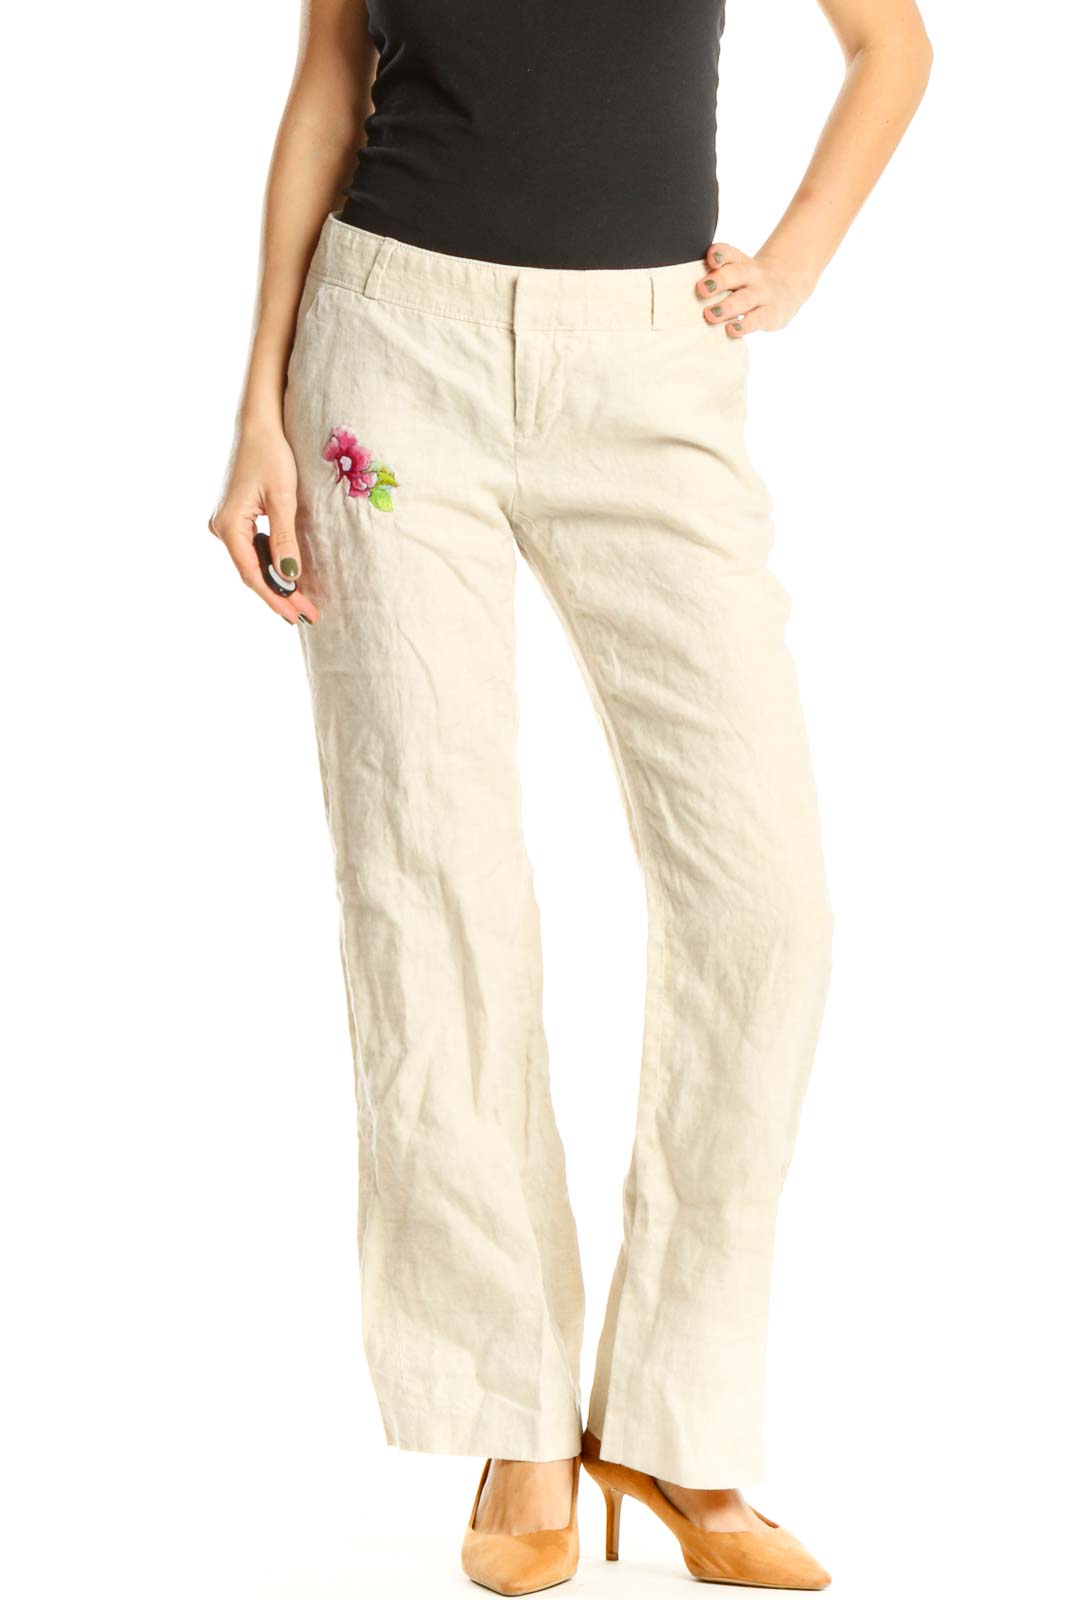 Reworked: Hand Embroidered Linen Pants with Pink Flower Front